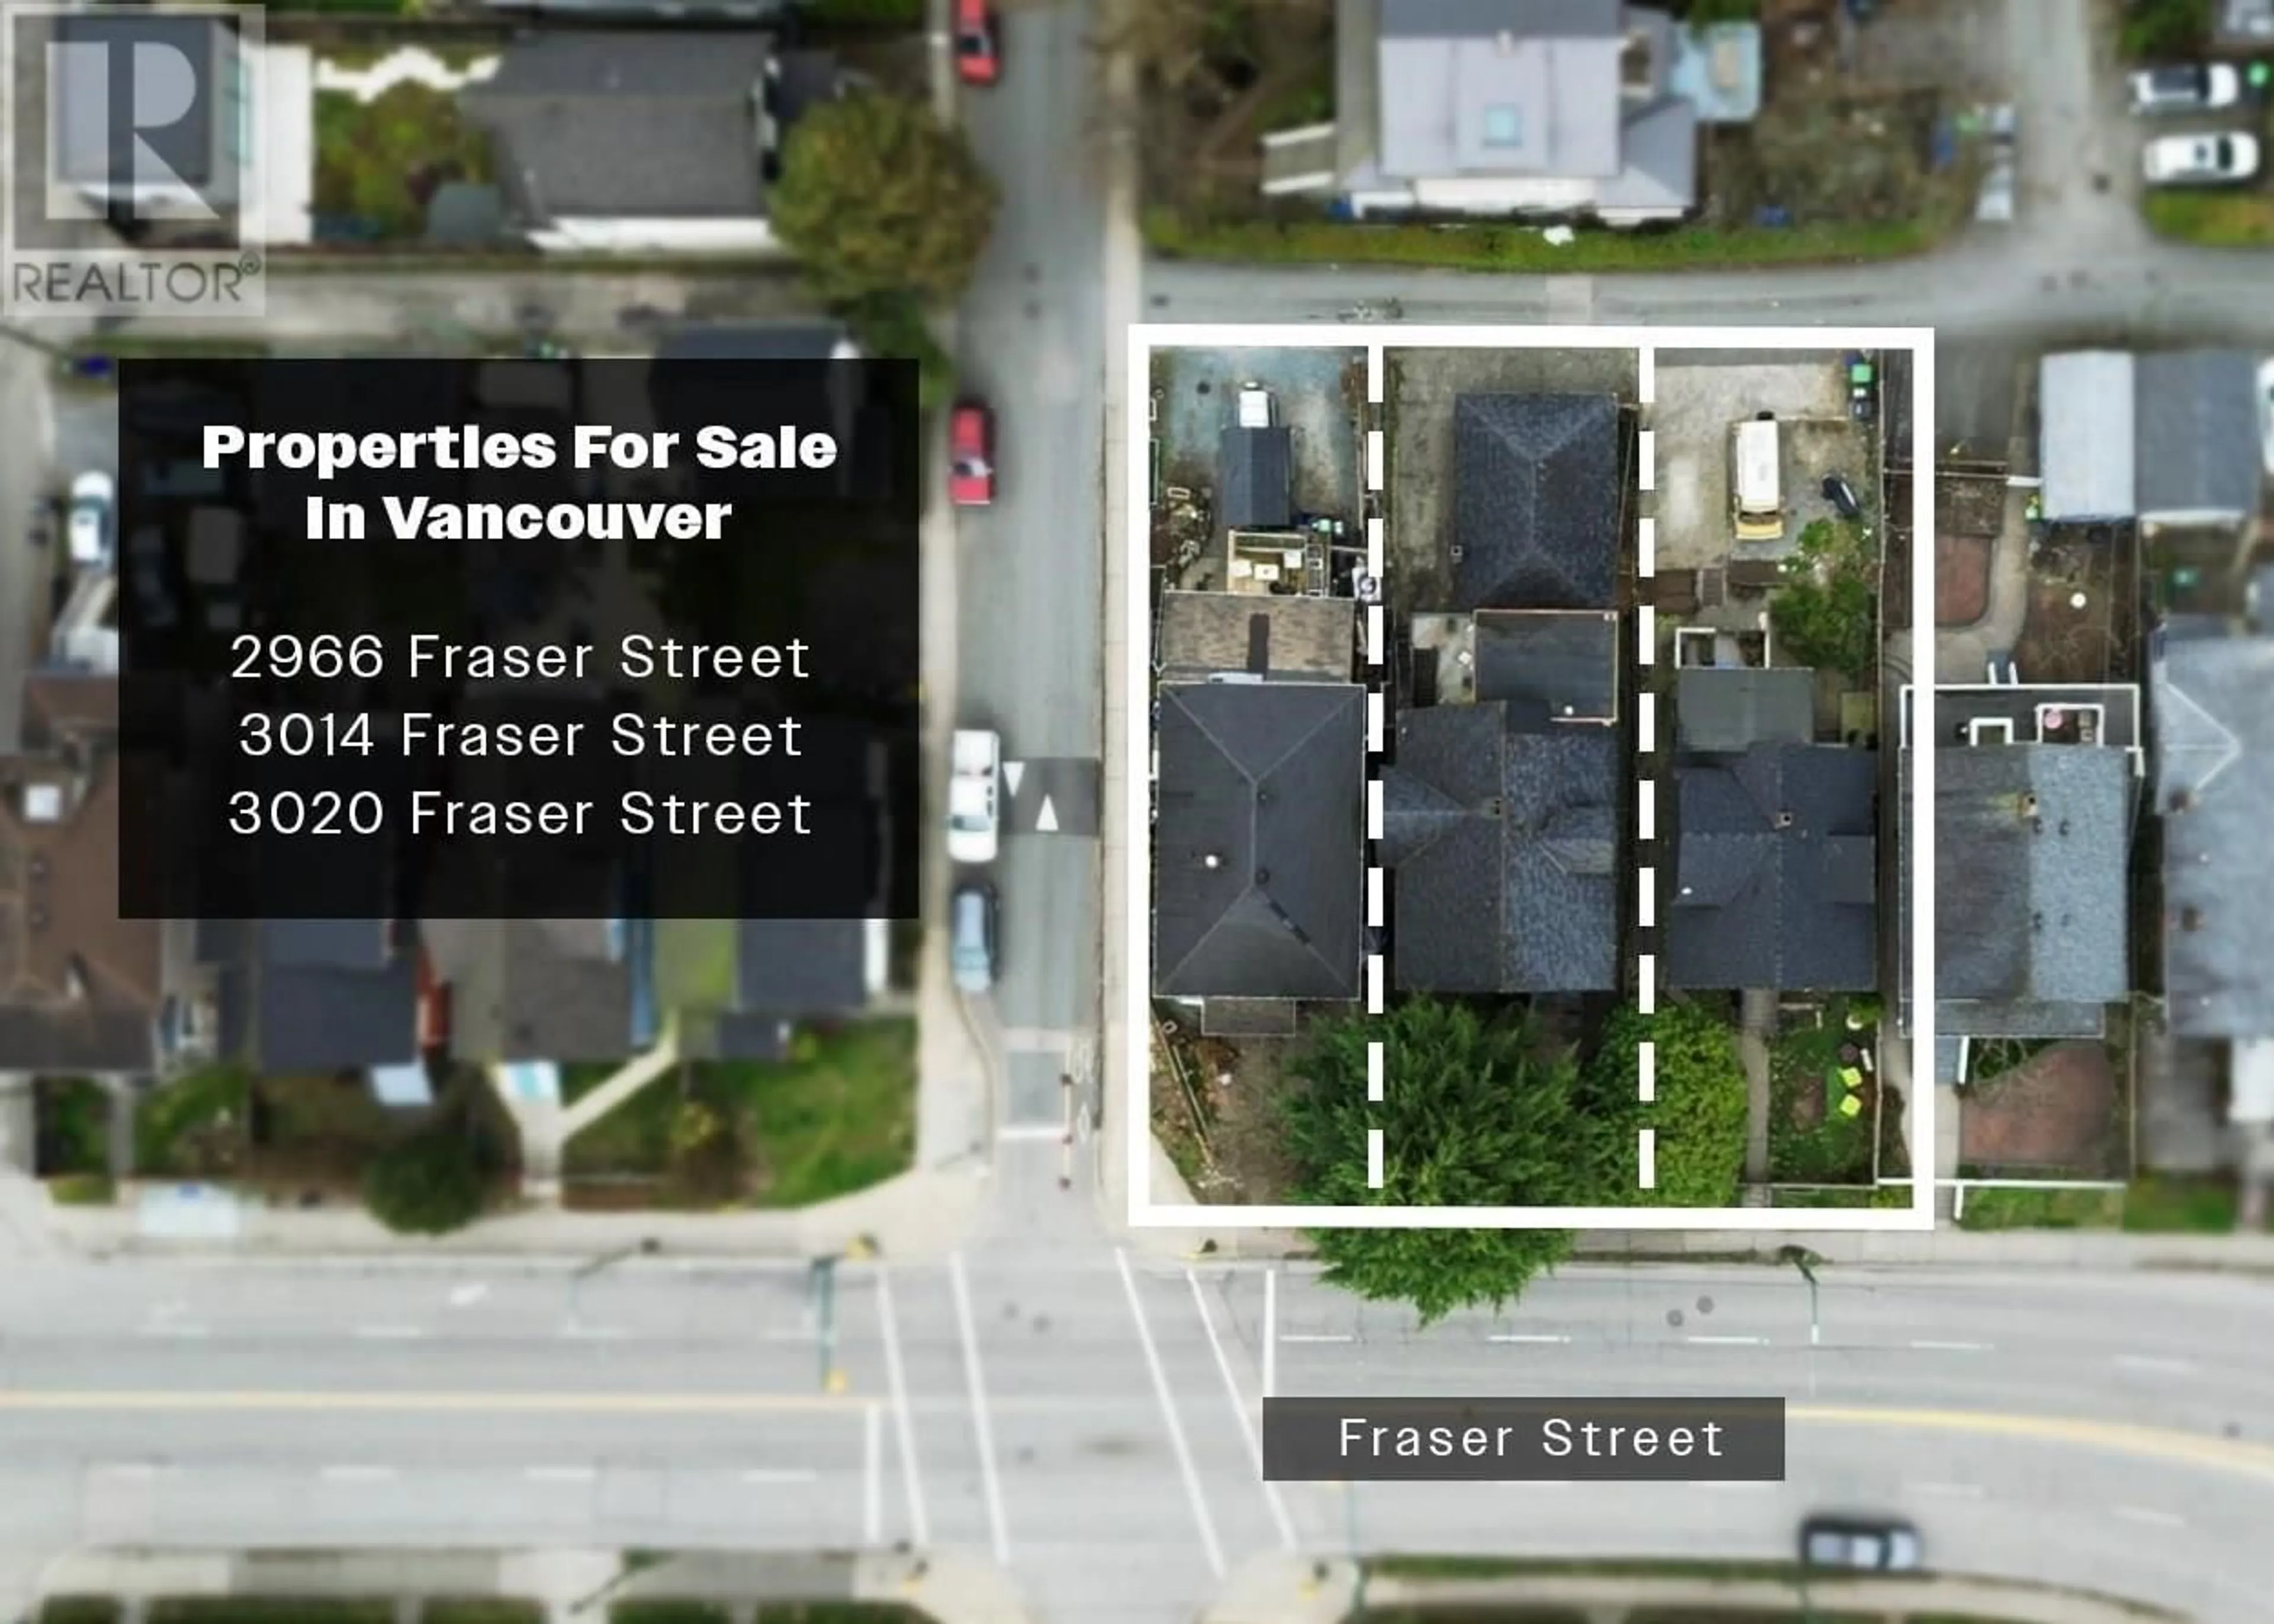 Street view for 3020 FRASER STREET, Vancouver British Columbia V5T3W3